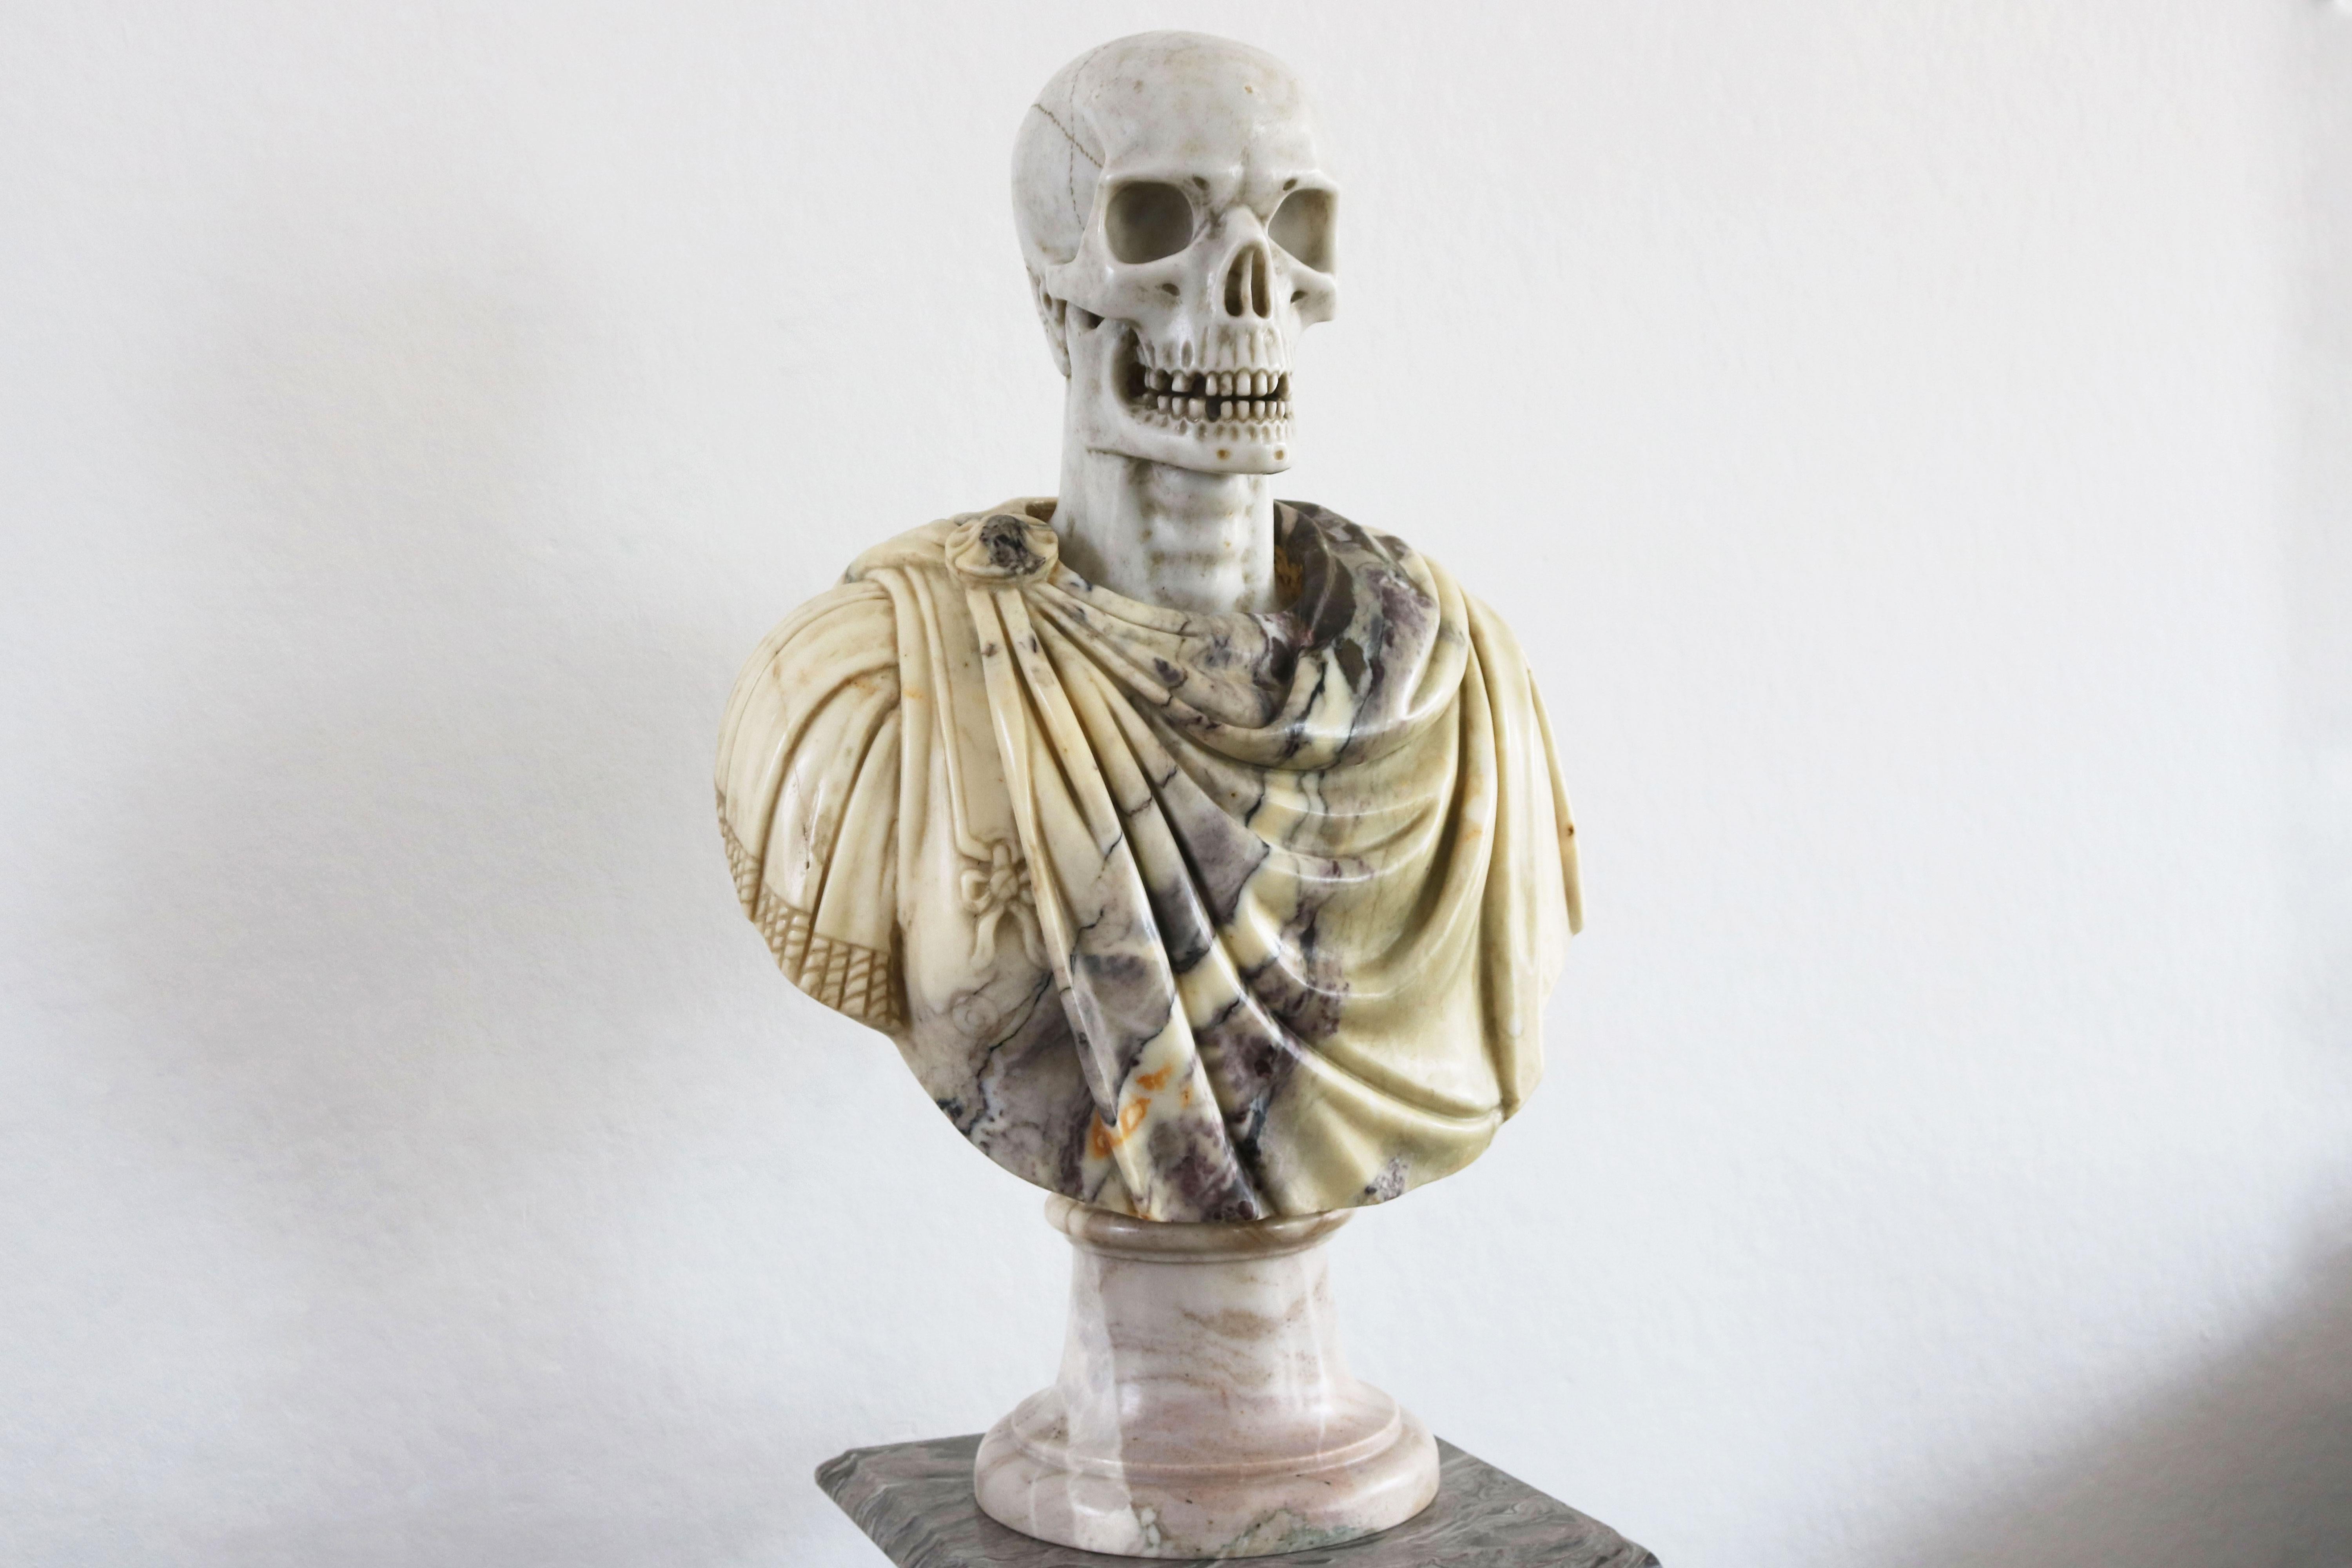 Masterfully carved Italian Vanitas bust in solid marble from late 19th century. 
White Carrara marble skull combined with a Pavonazzetto marble Roman toga (robe). 
We have seen many marble sculptures during our lifetime but this one is simply